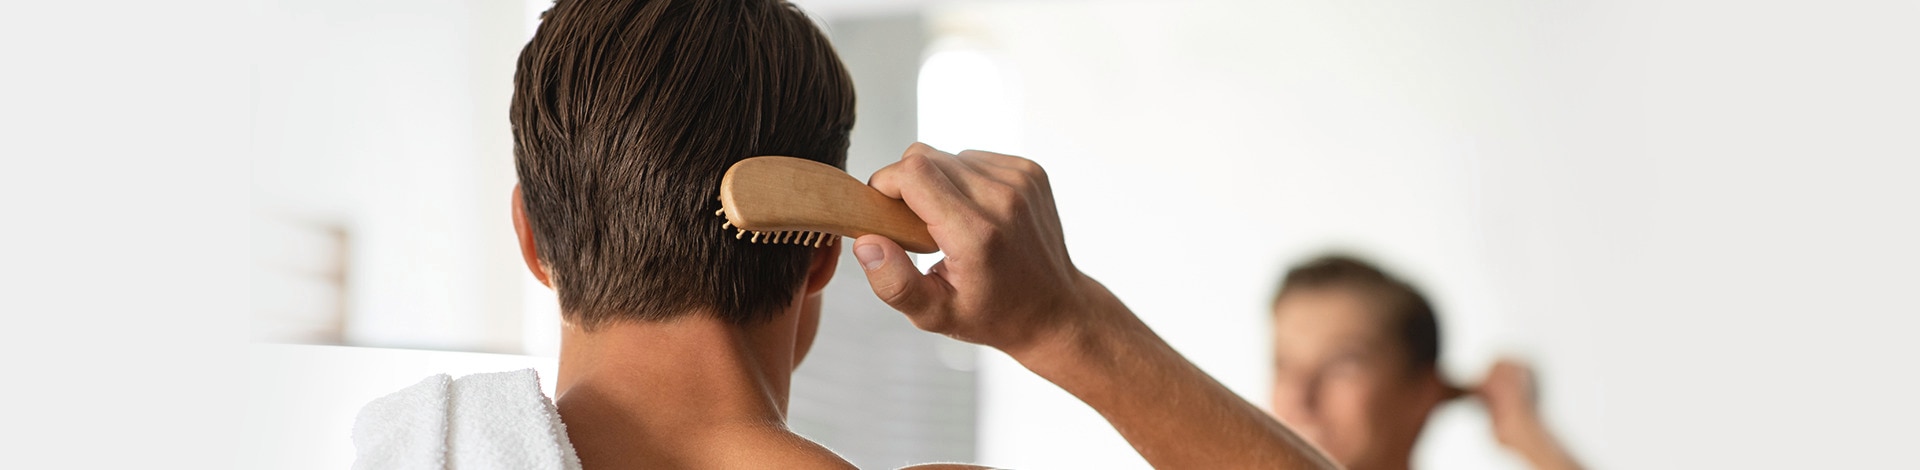 Man brushing hair while looking in the mirror